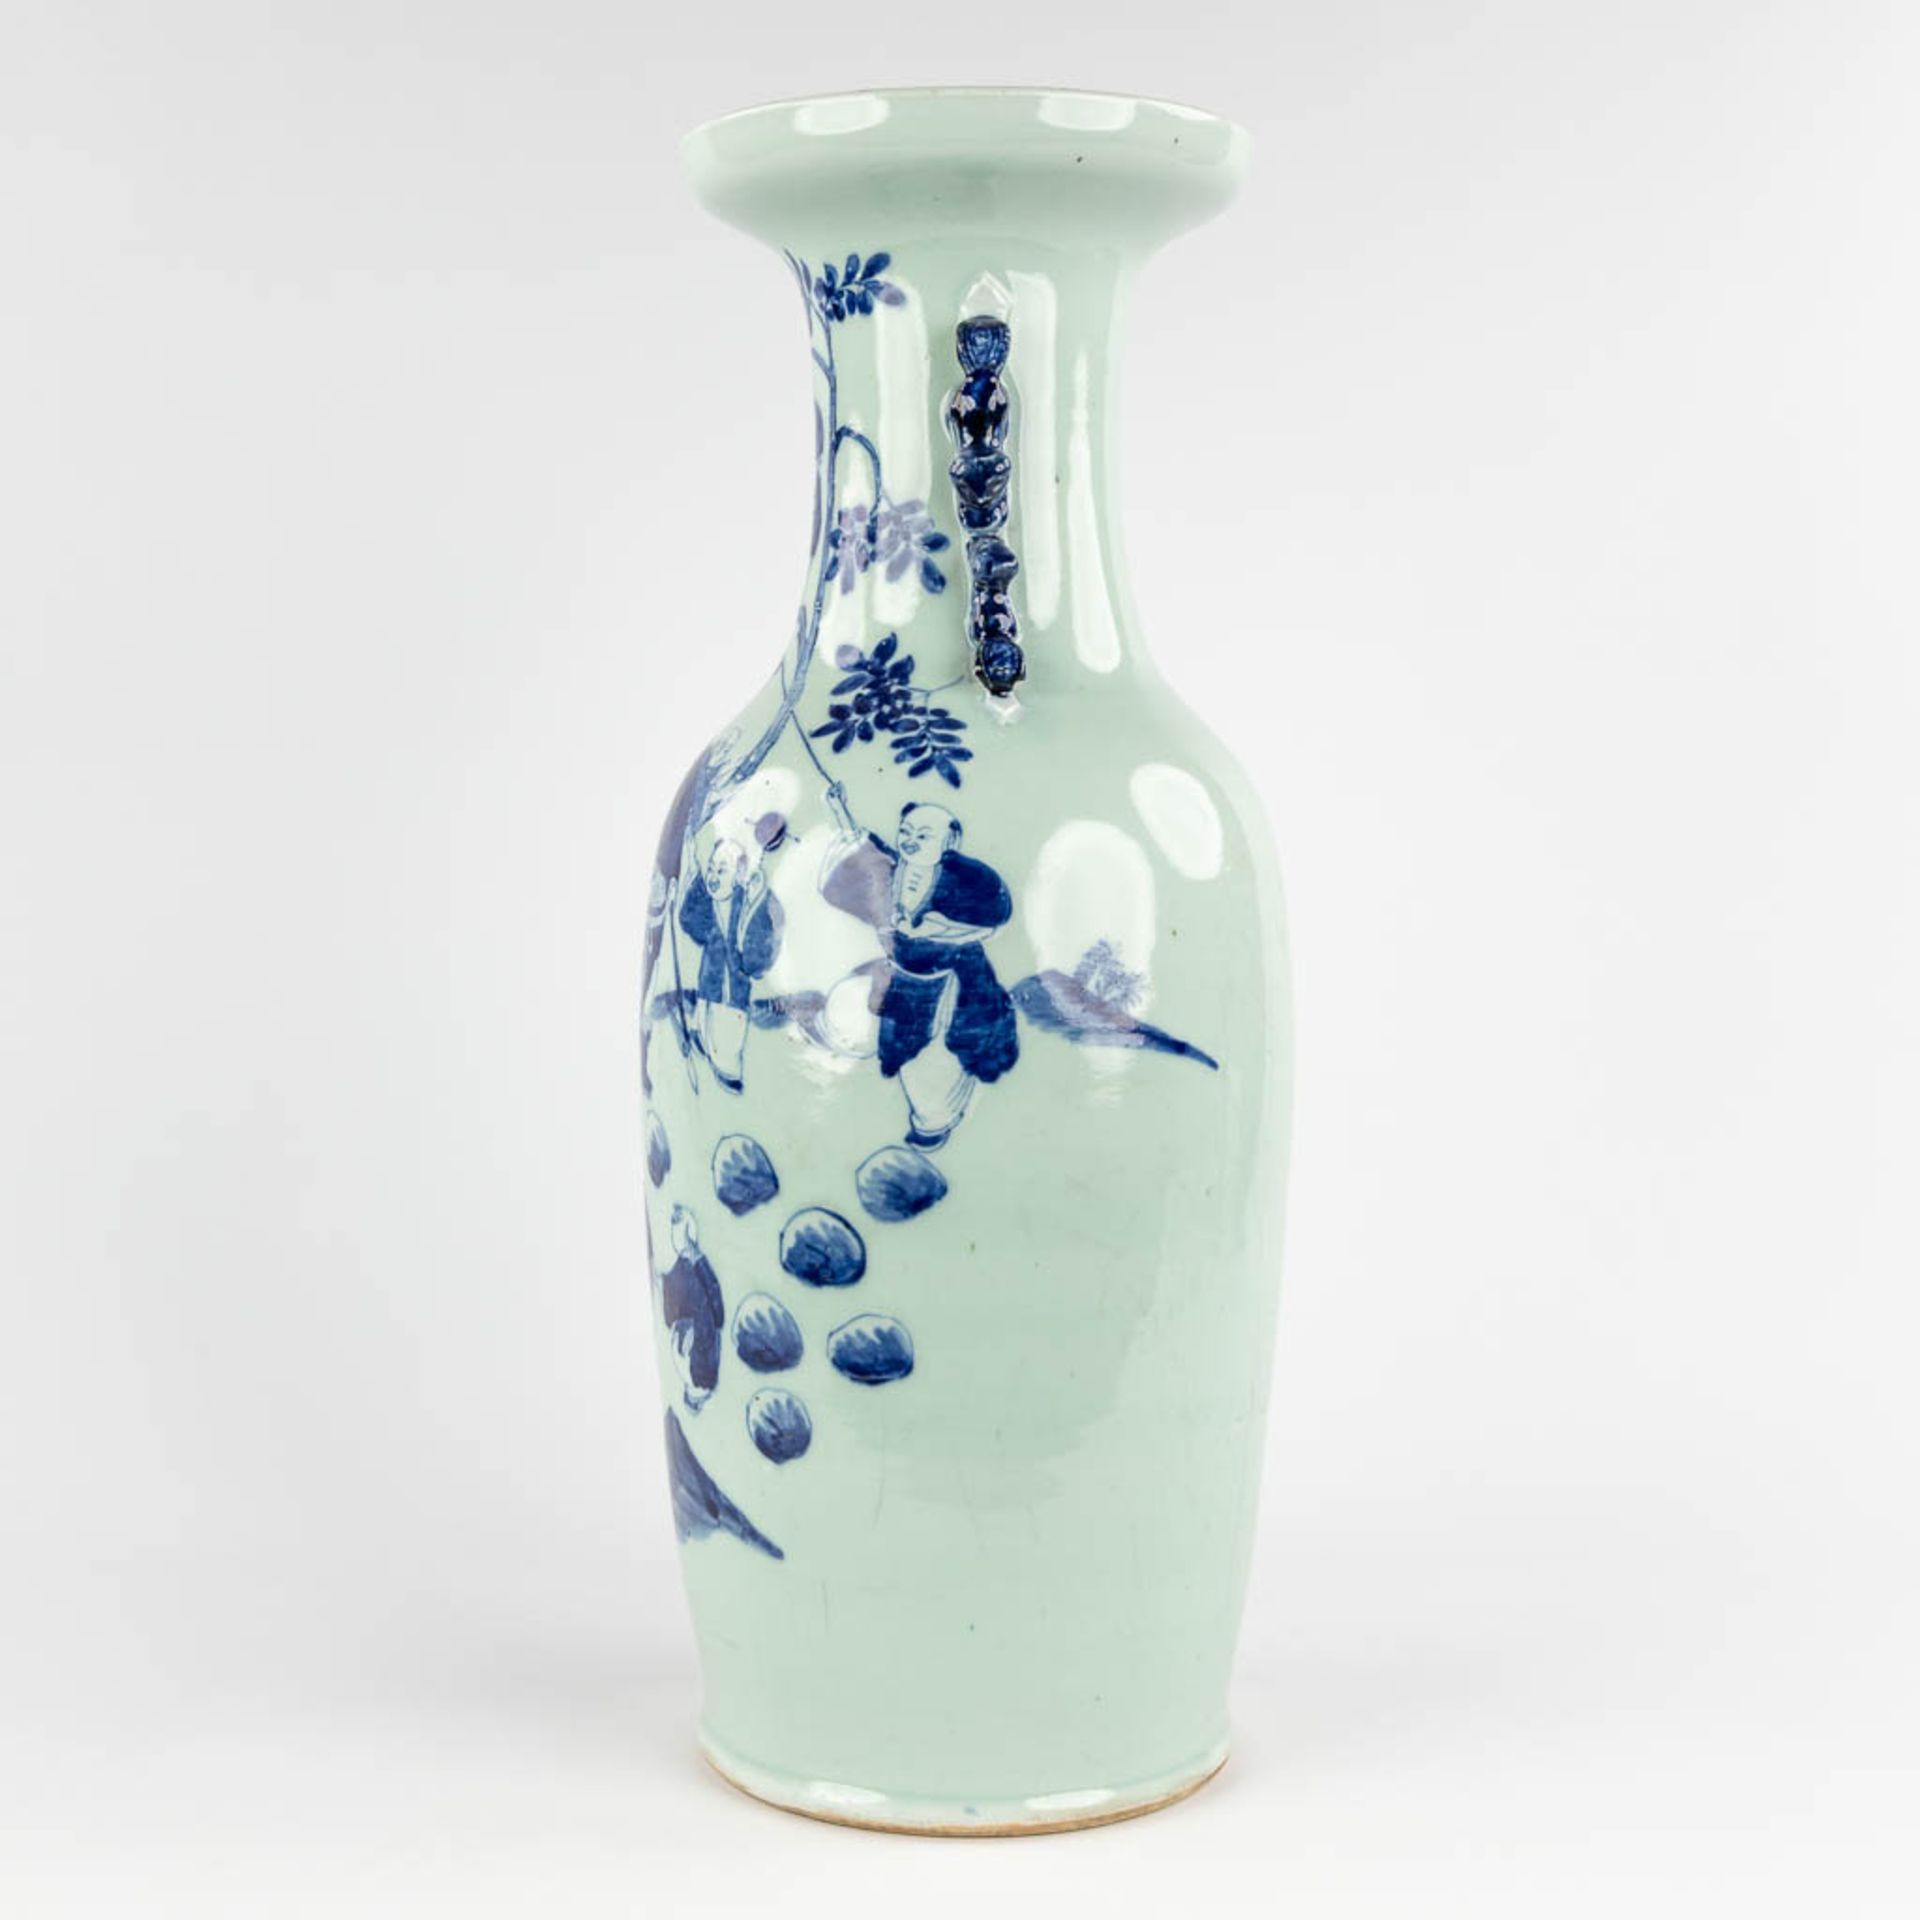 A Chinese celadon vase, blue-white, decorated with wise men. 19th/20th C. (H:59 x D:23 cm) - Image 6 of 16